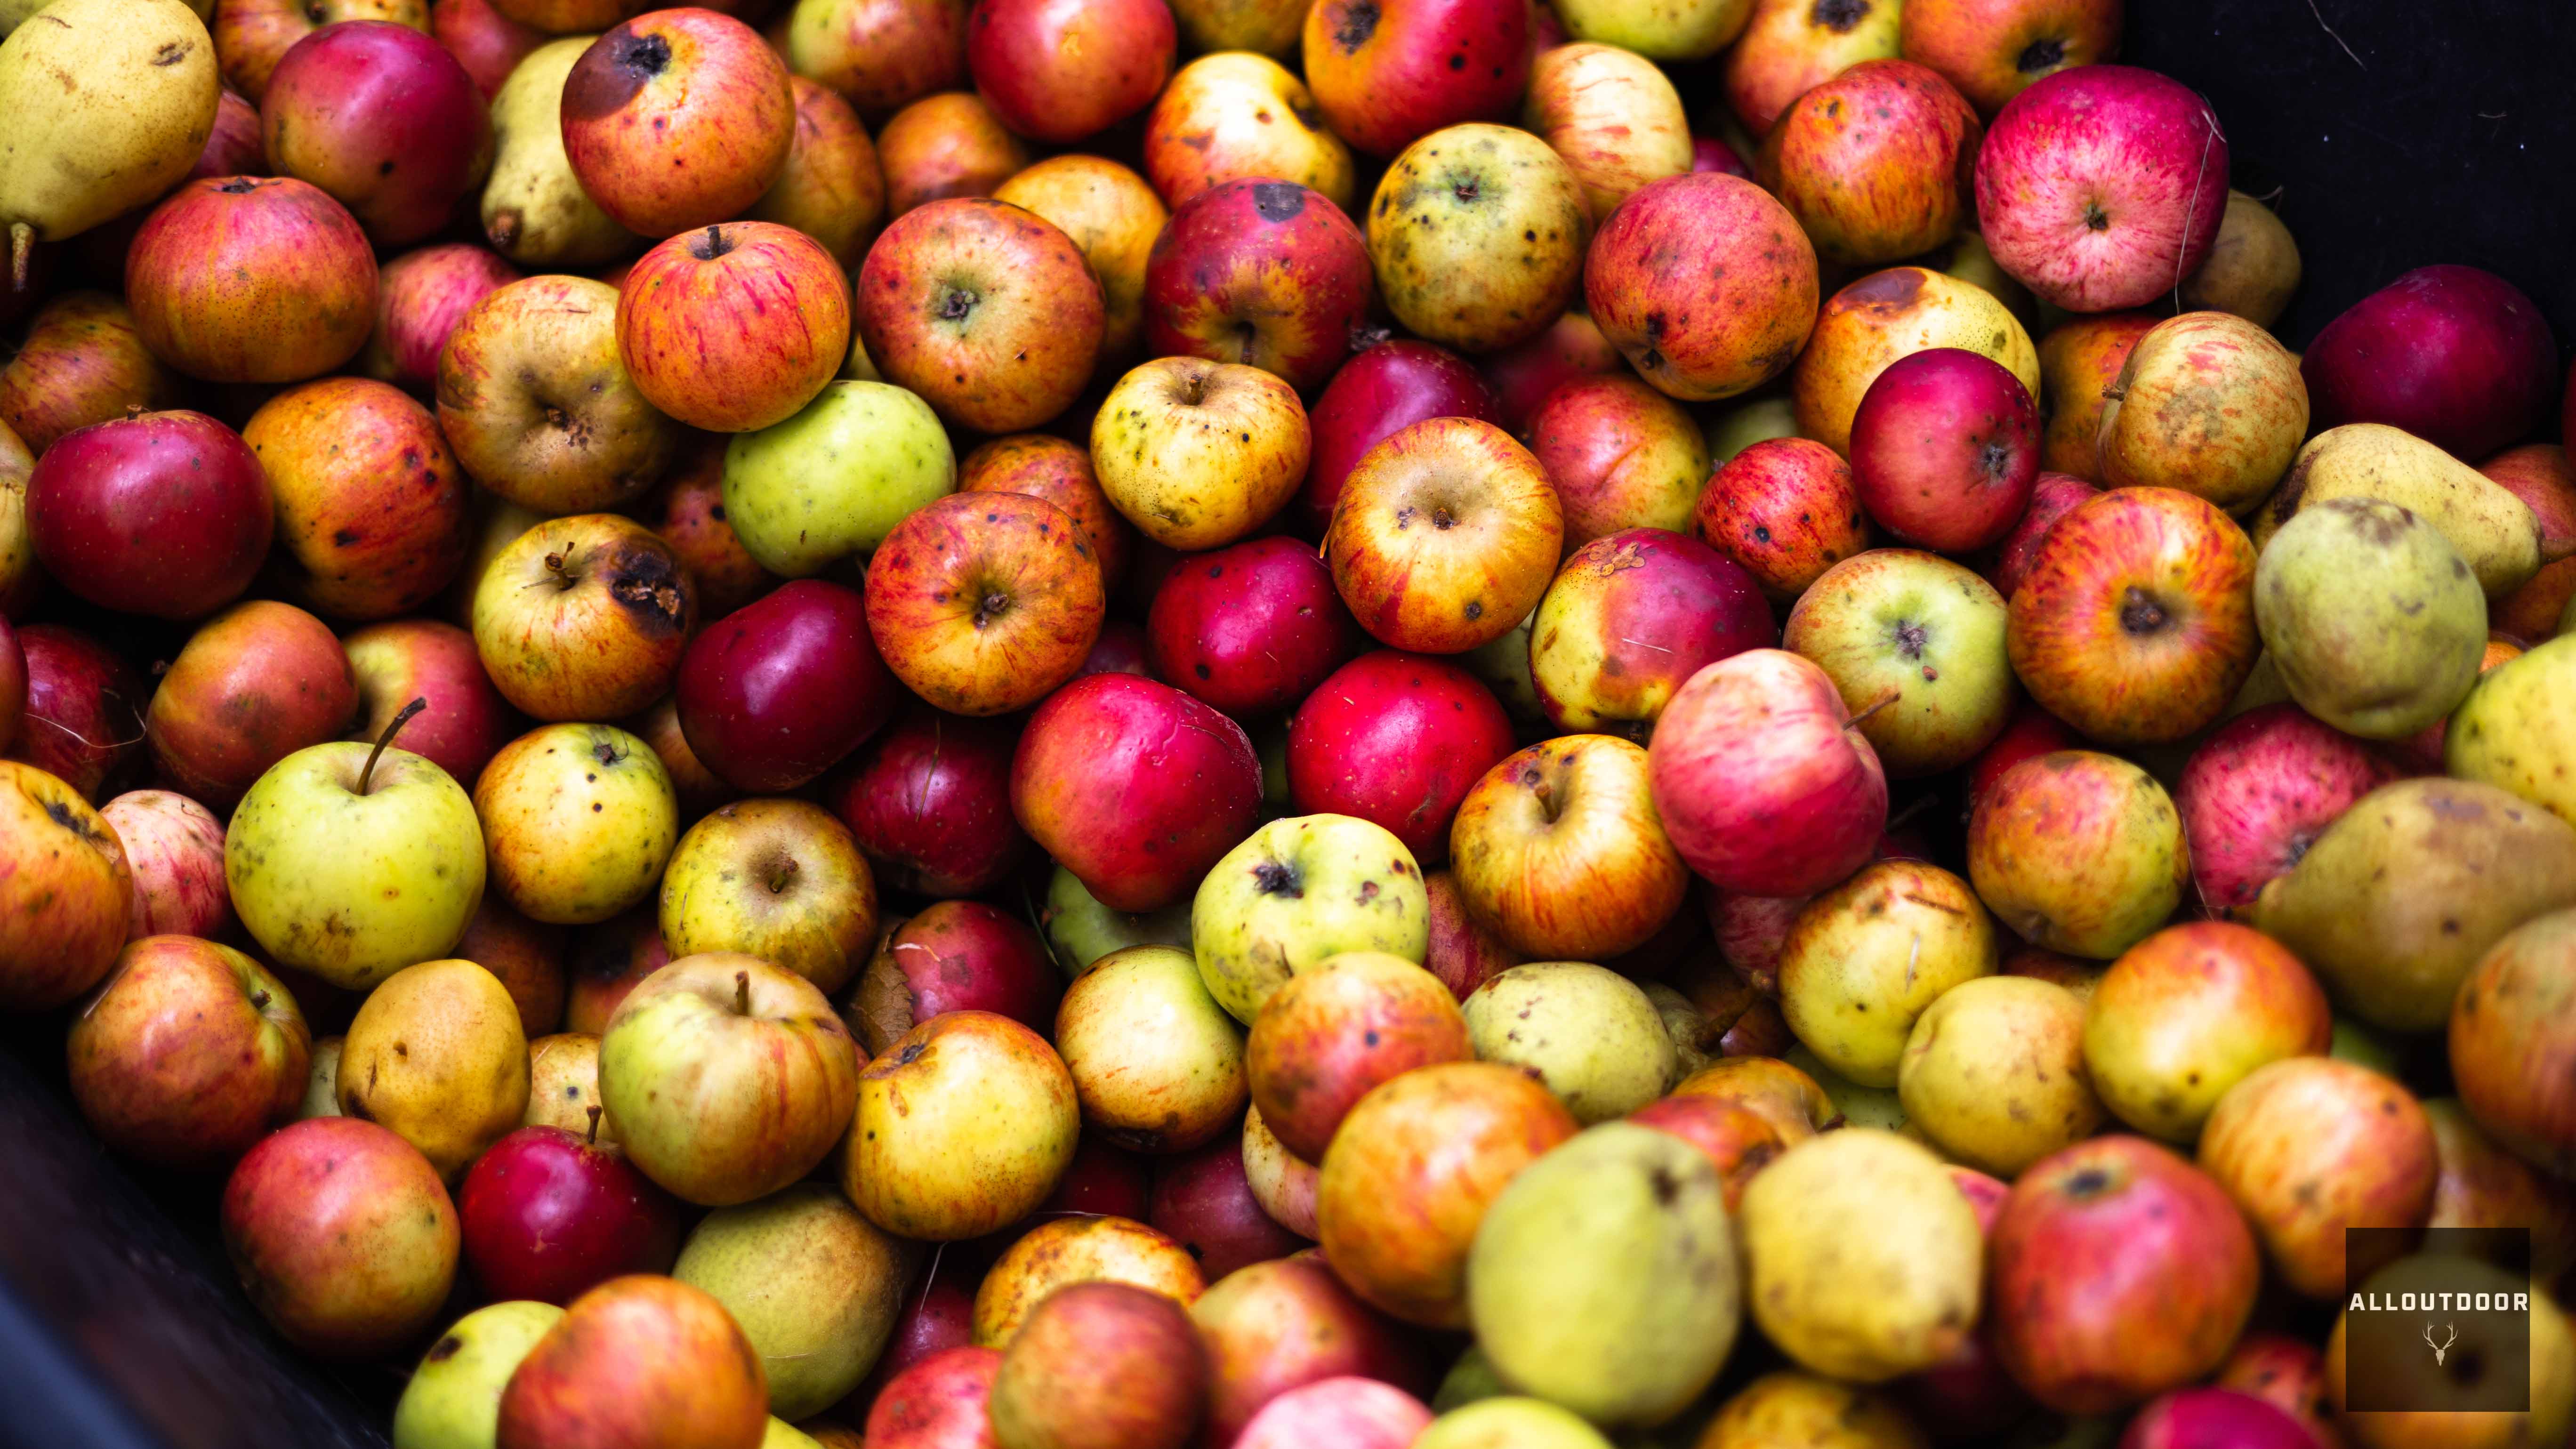 DIY Project - Pressing your Own Homemade Hard Apple Cider, Part 1